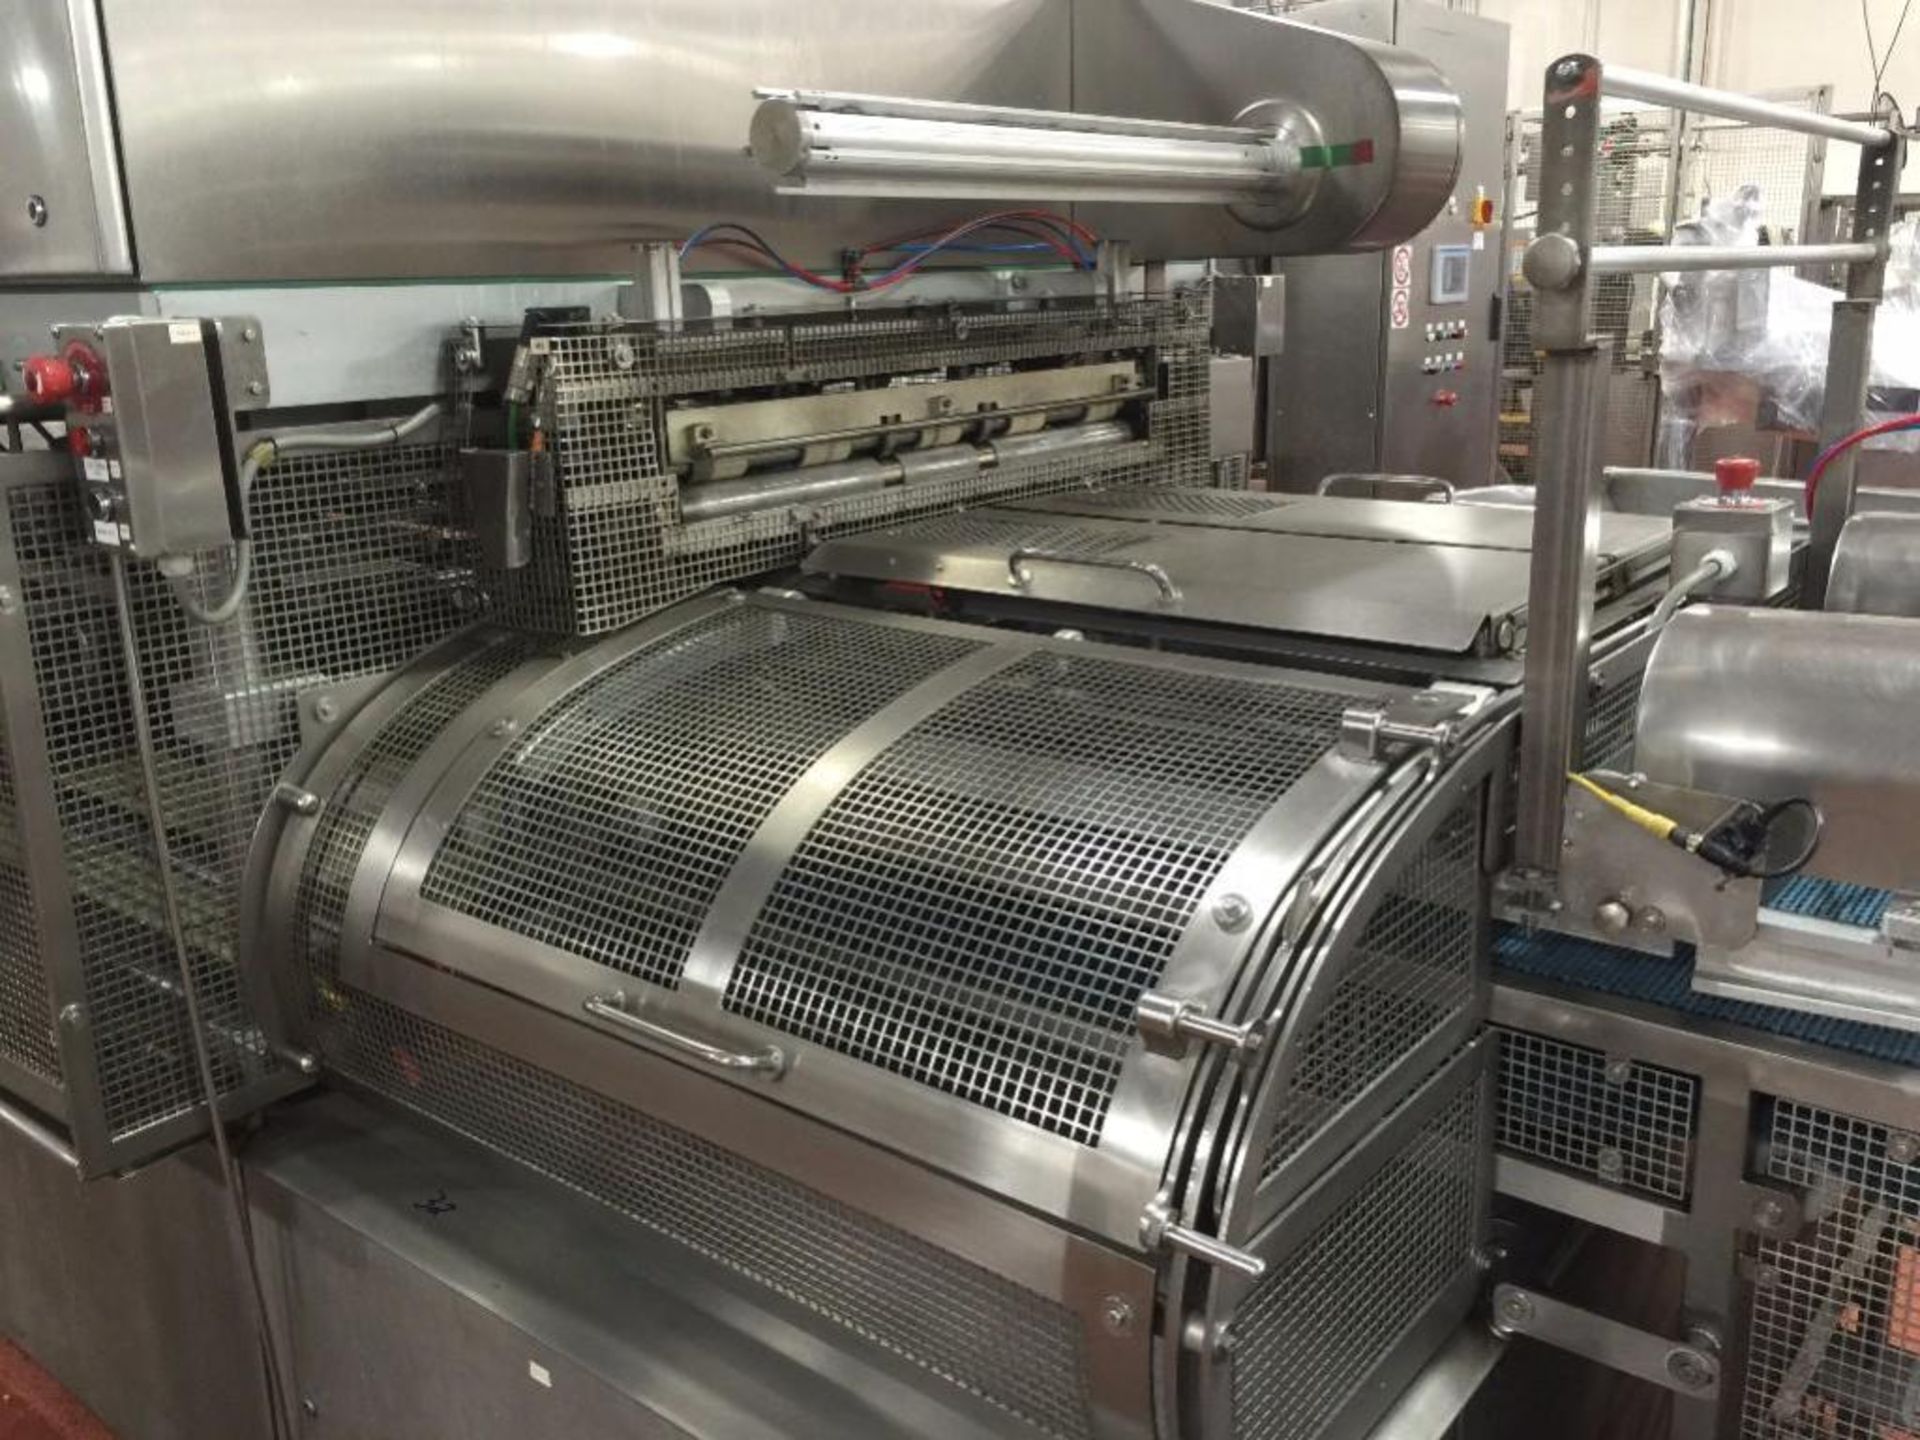 2009 G. Mondini tray sealer, model EVO 4X, s/n 3674/09, 4 wide, with carts and dies. With SS control - Image 2 of 45